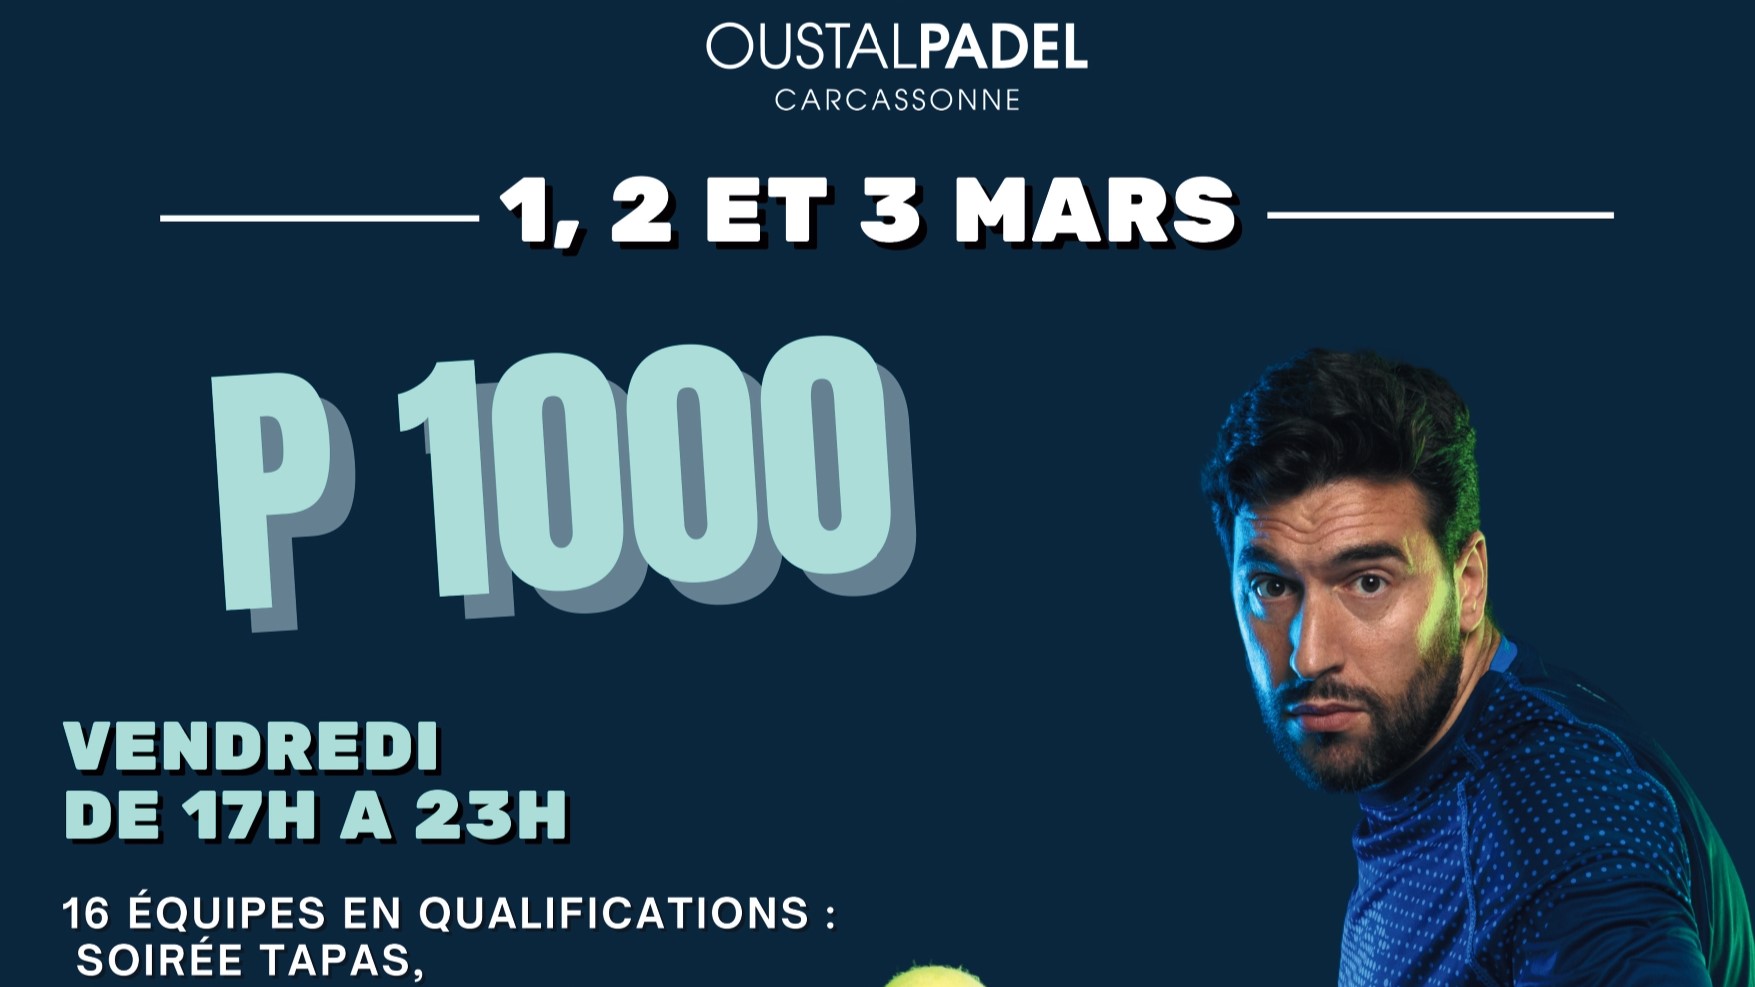 P1000 Oustal Padel – The list of players who will travel to Aude